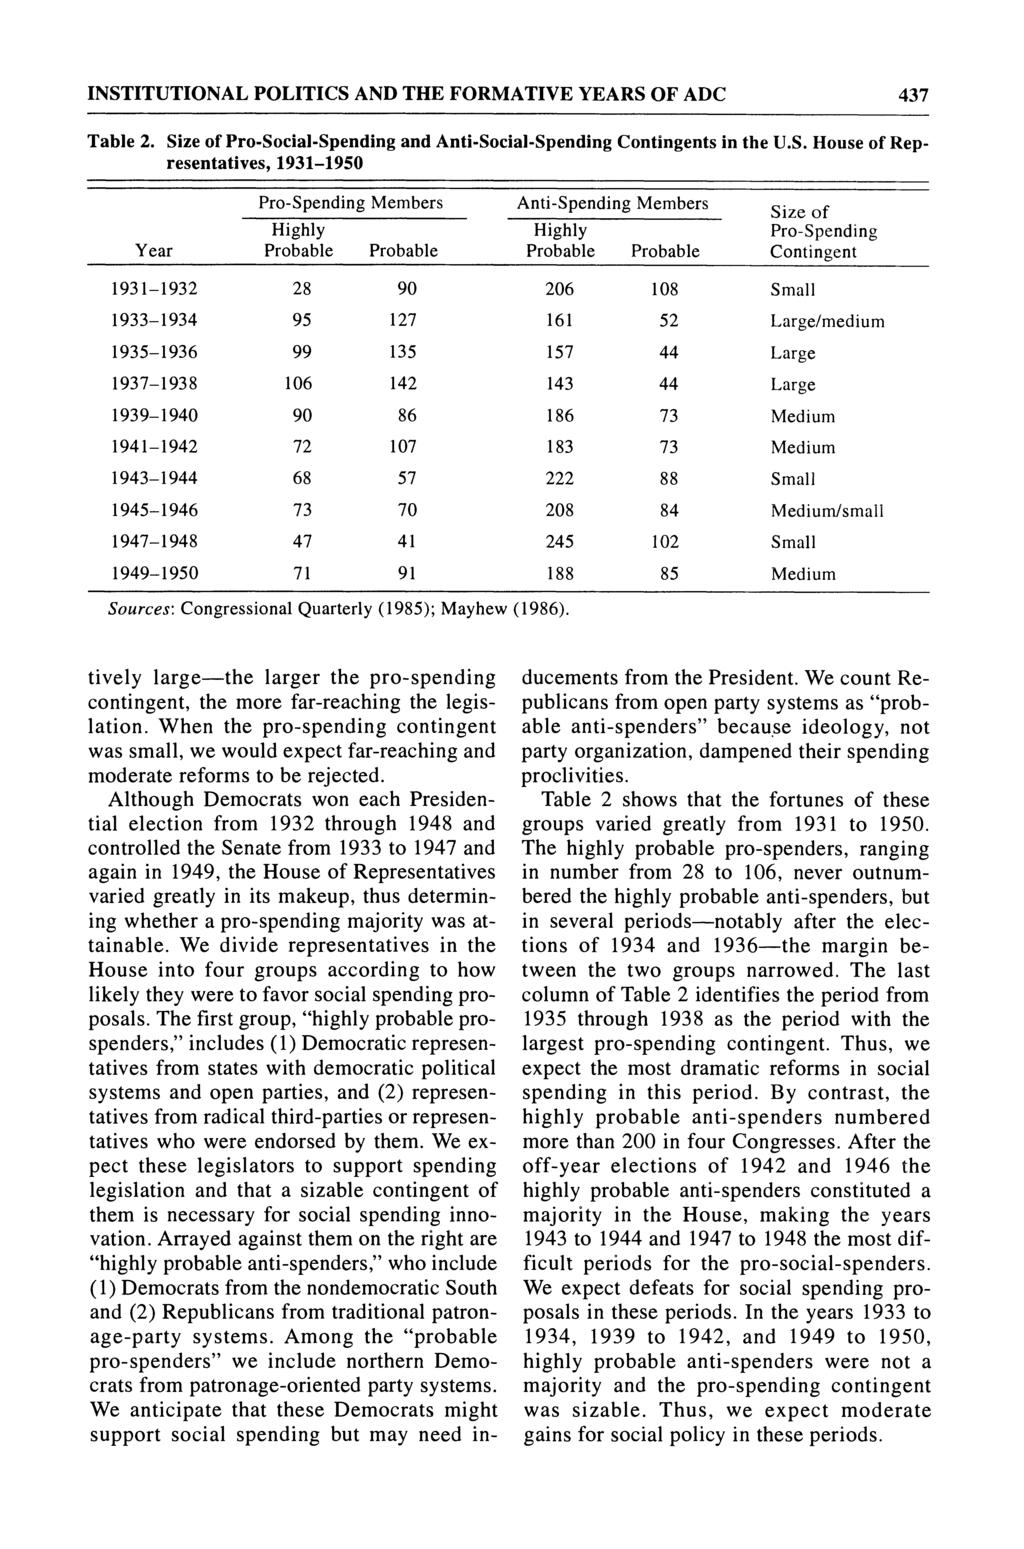 INSTITUTIONAL POLITICS AND THE FORMATIVE YEARS OF ADC 437 Table 2. Size of Pro-Social-Spending and Anti-Social-Spending Contingents in the U.S. House of Kepresentatives, 1931-1950 Pro-Spending